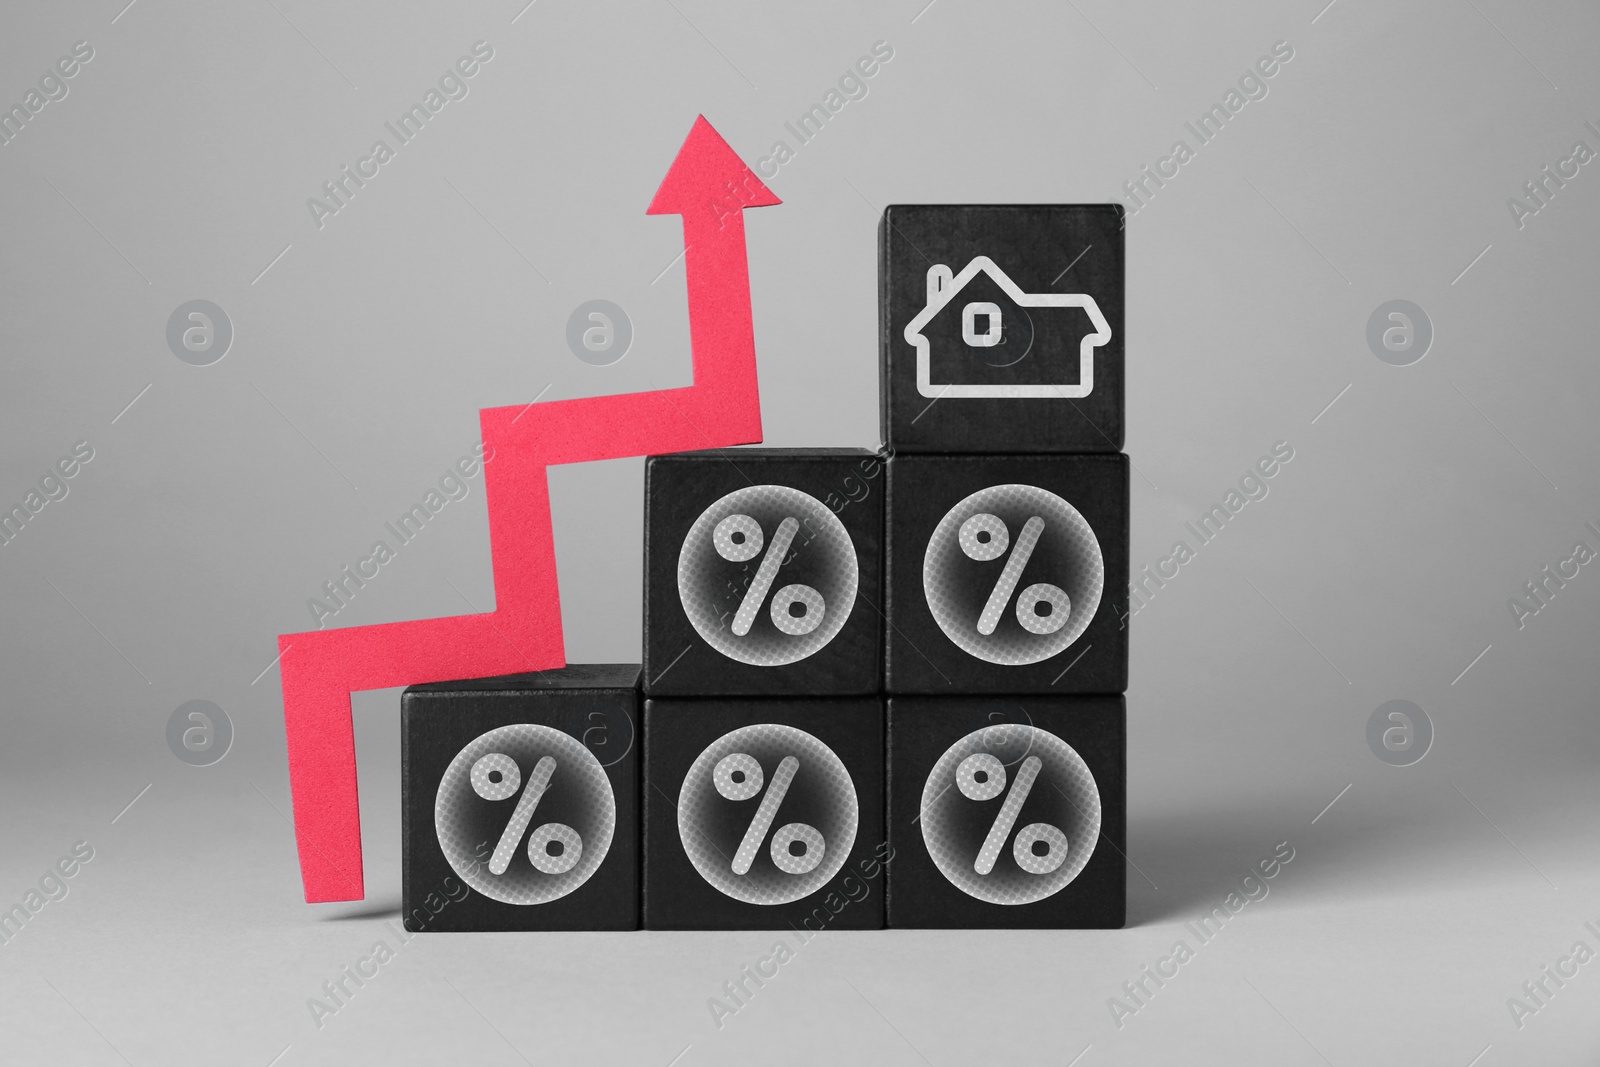 Image of Mortgage rate rising illustrated by upward arrow, black cubes with percent signs and house icon on gray background